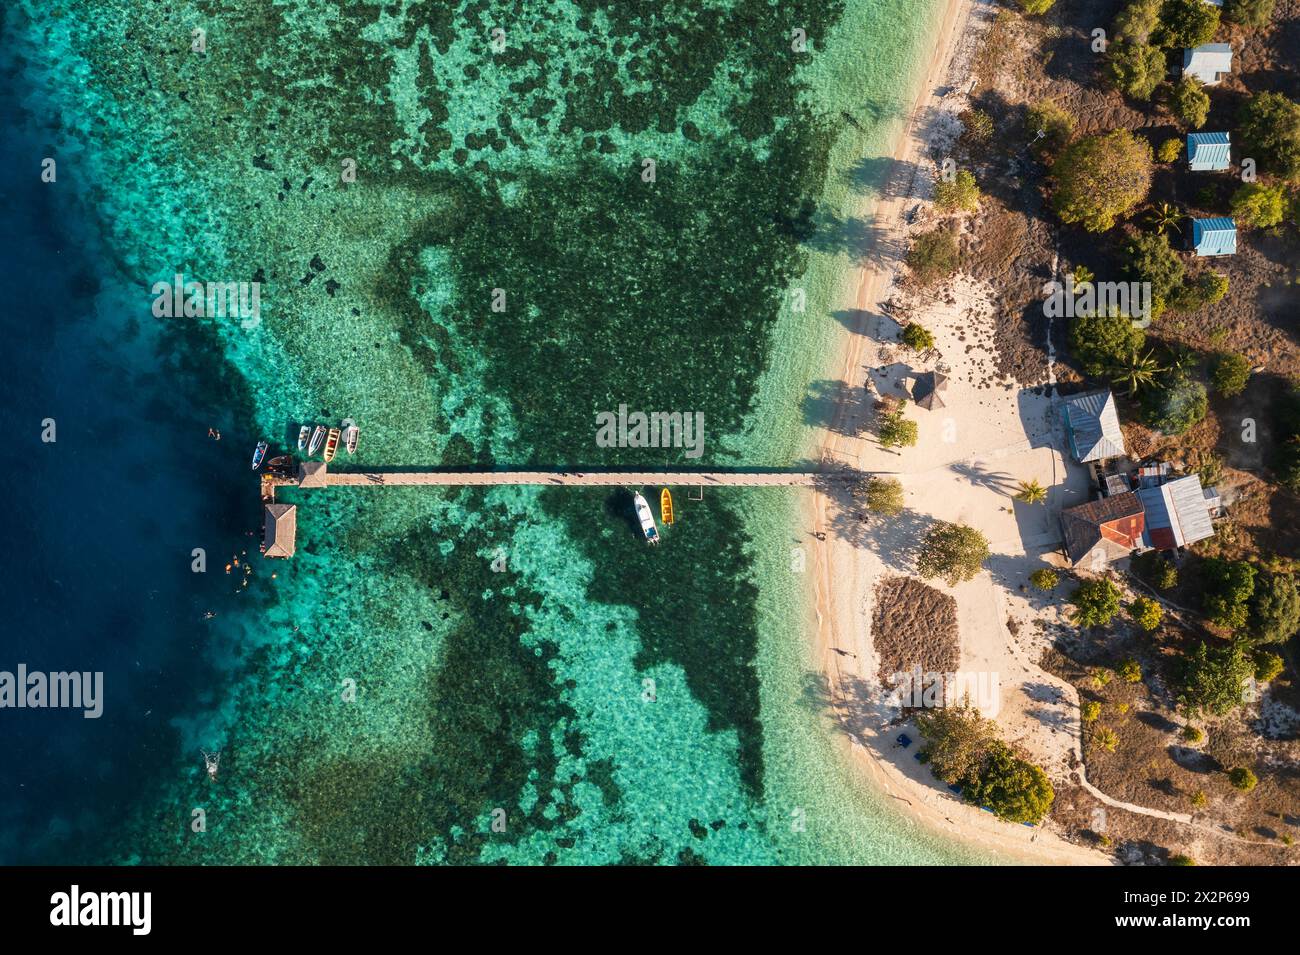 Komodo, Indonesia: Top down view of the Kanawa island with beach bungalows, the jetty and reef in Komodo islands near Labuan Bajo in Flores, Indonesia Stock Photo